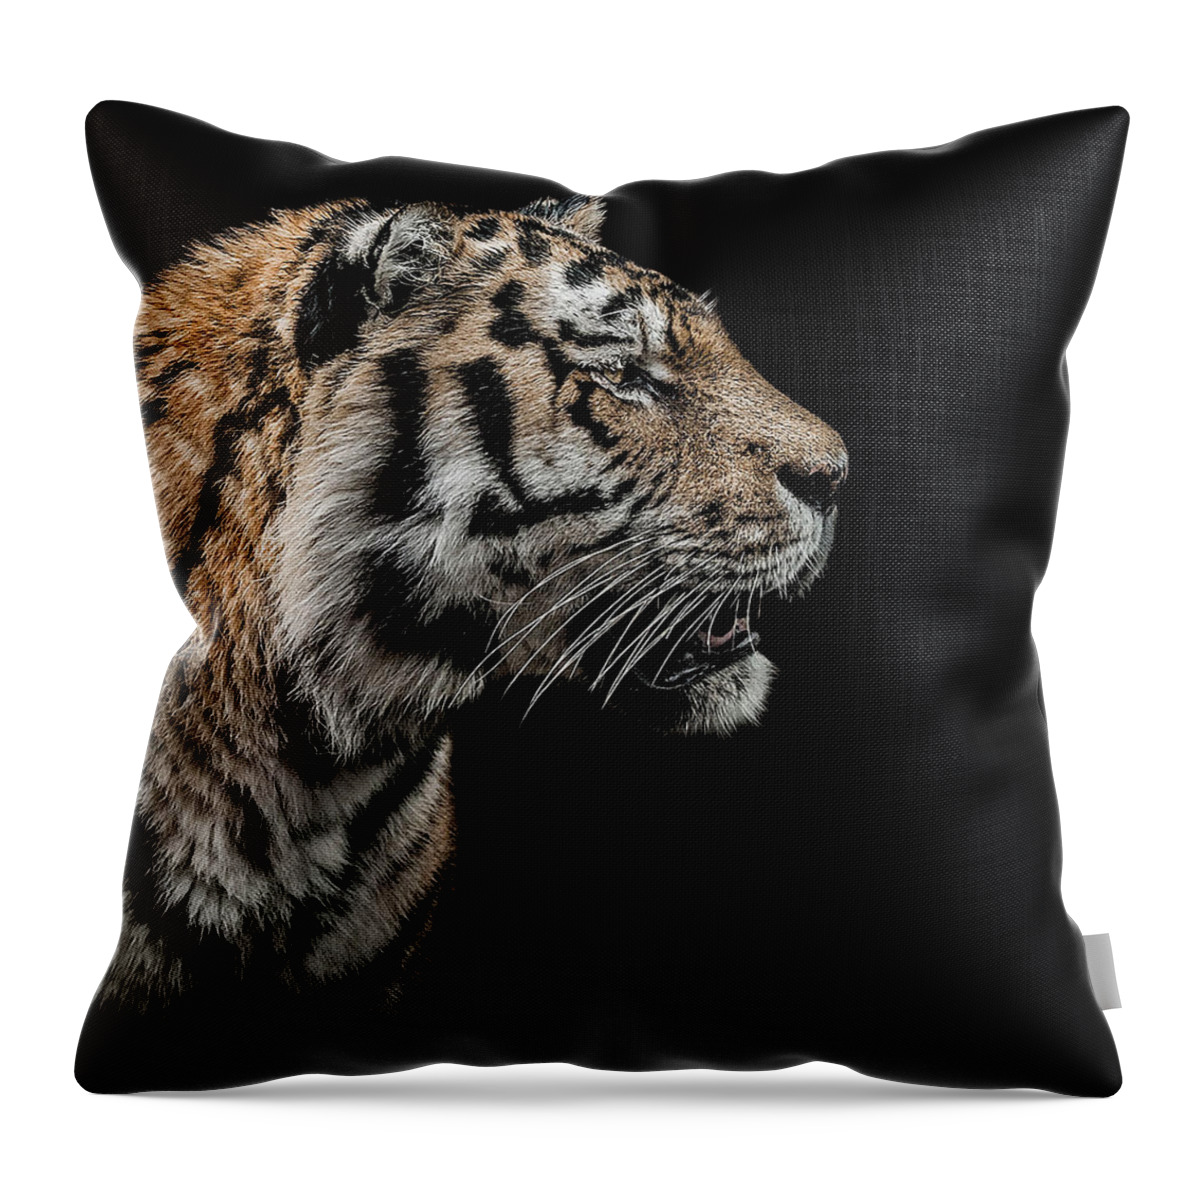 Low Key Throw Pillow featuring the photograph The Hunter by Paul Neville